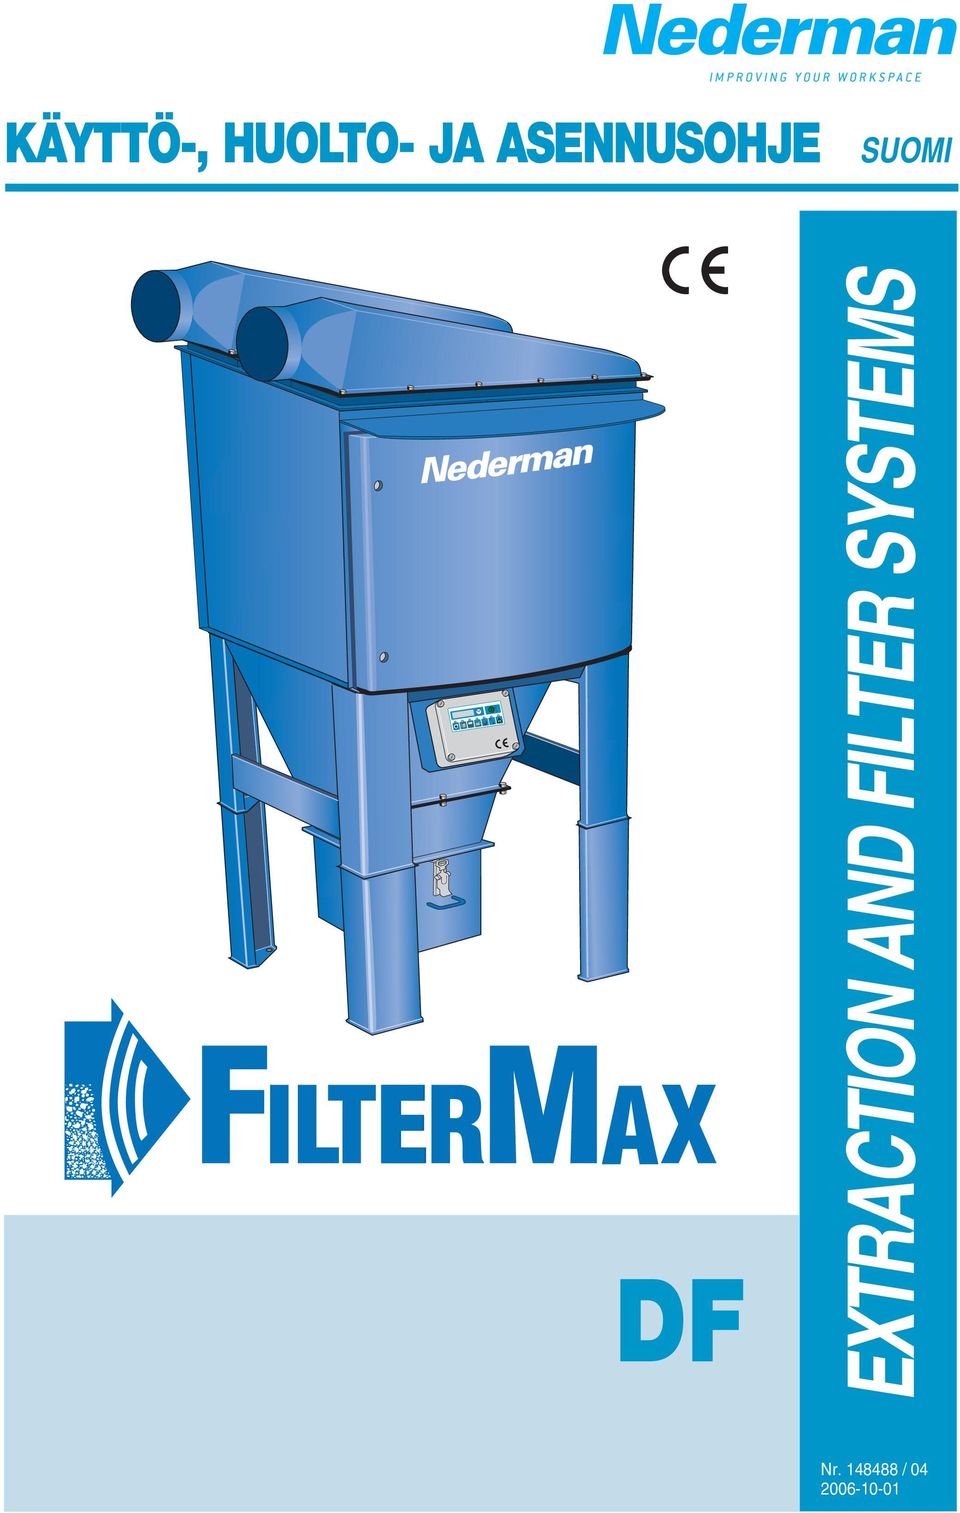 EXTRACTION AND FILTER